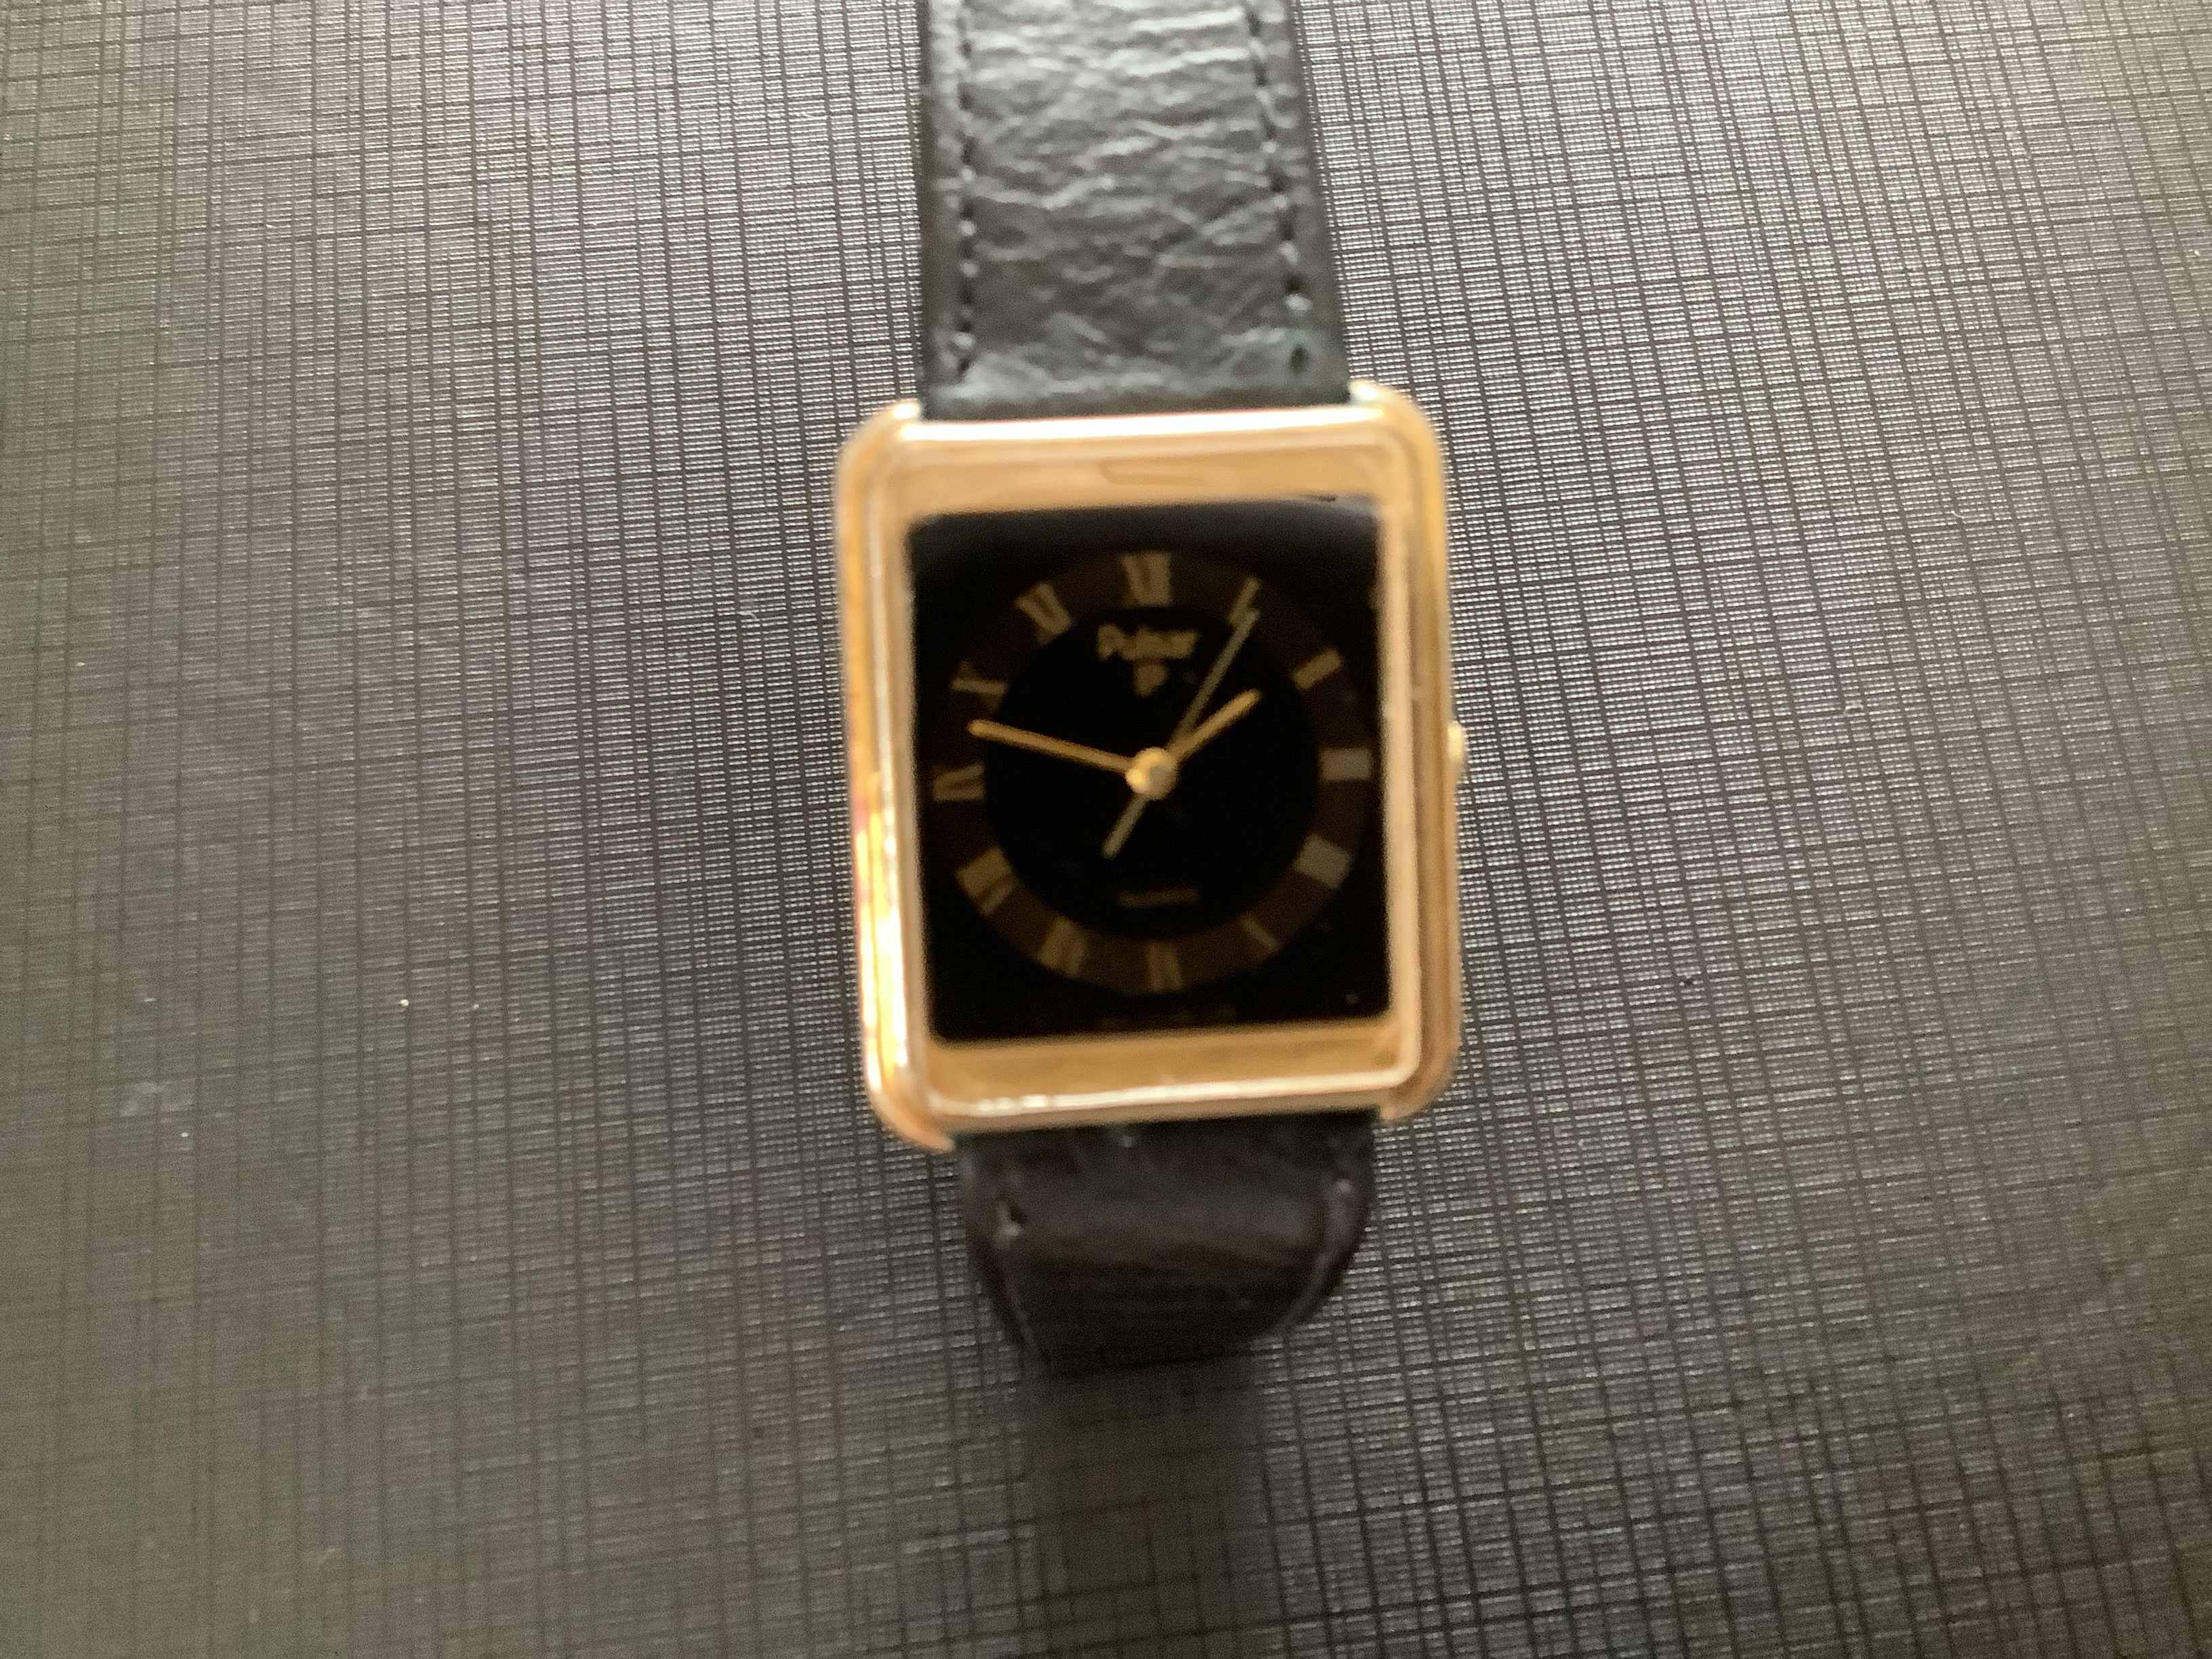 Gorgeous 1990 Pulsar Gold Plated Wristwatch (GS 142) - Image 3 of 6